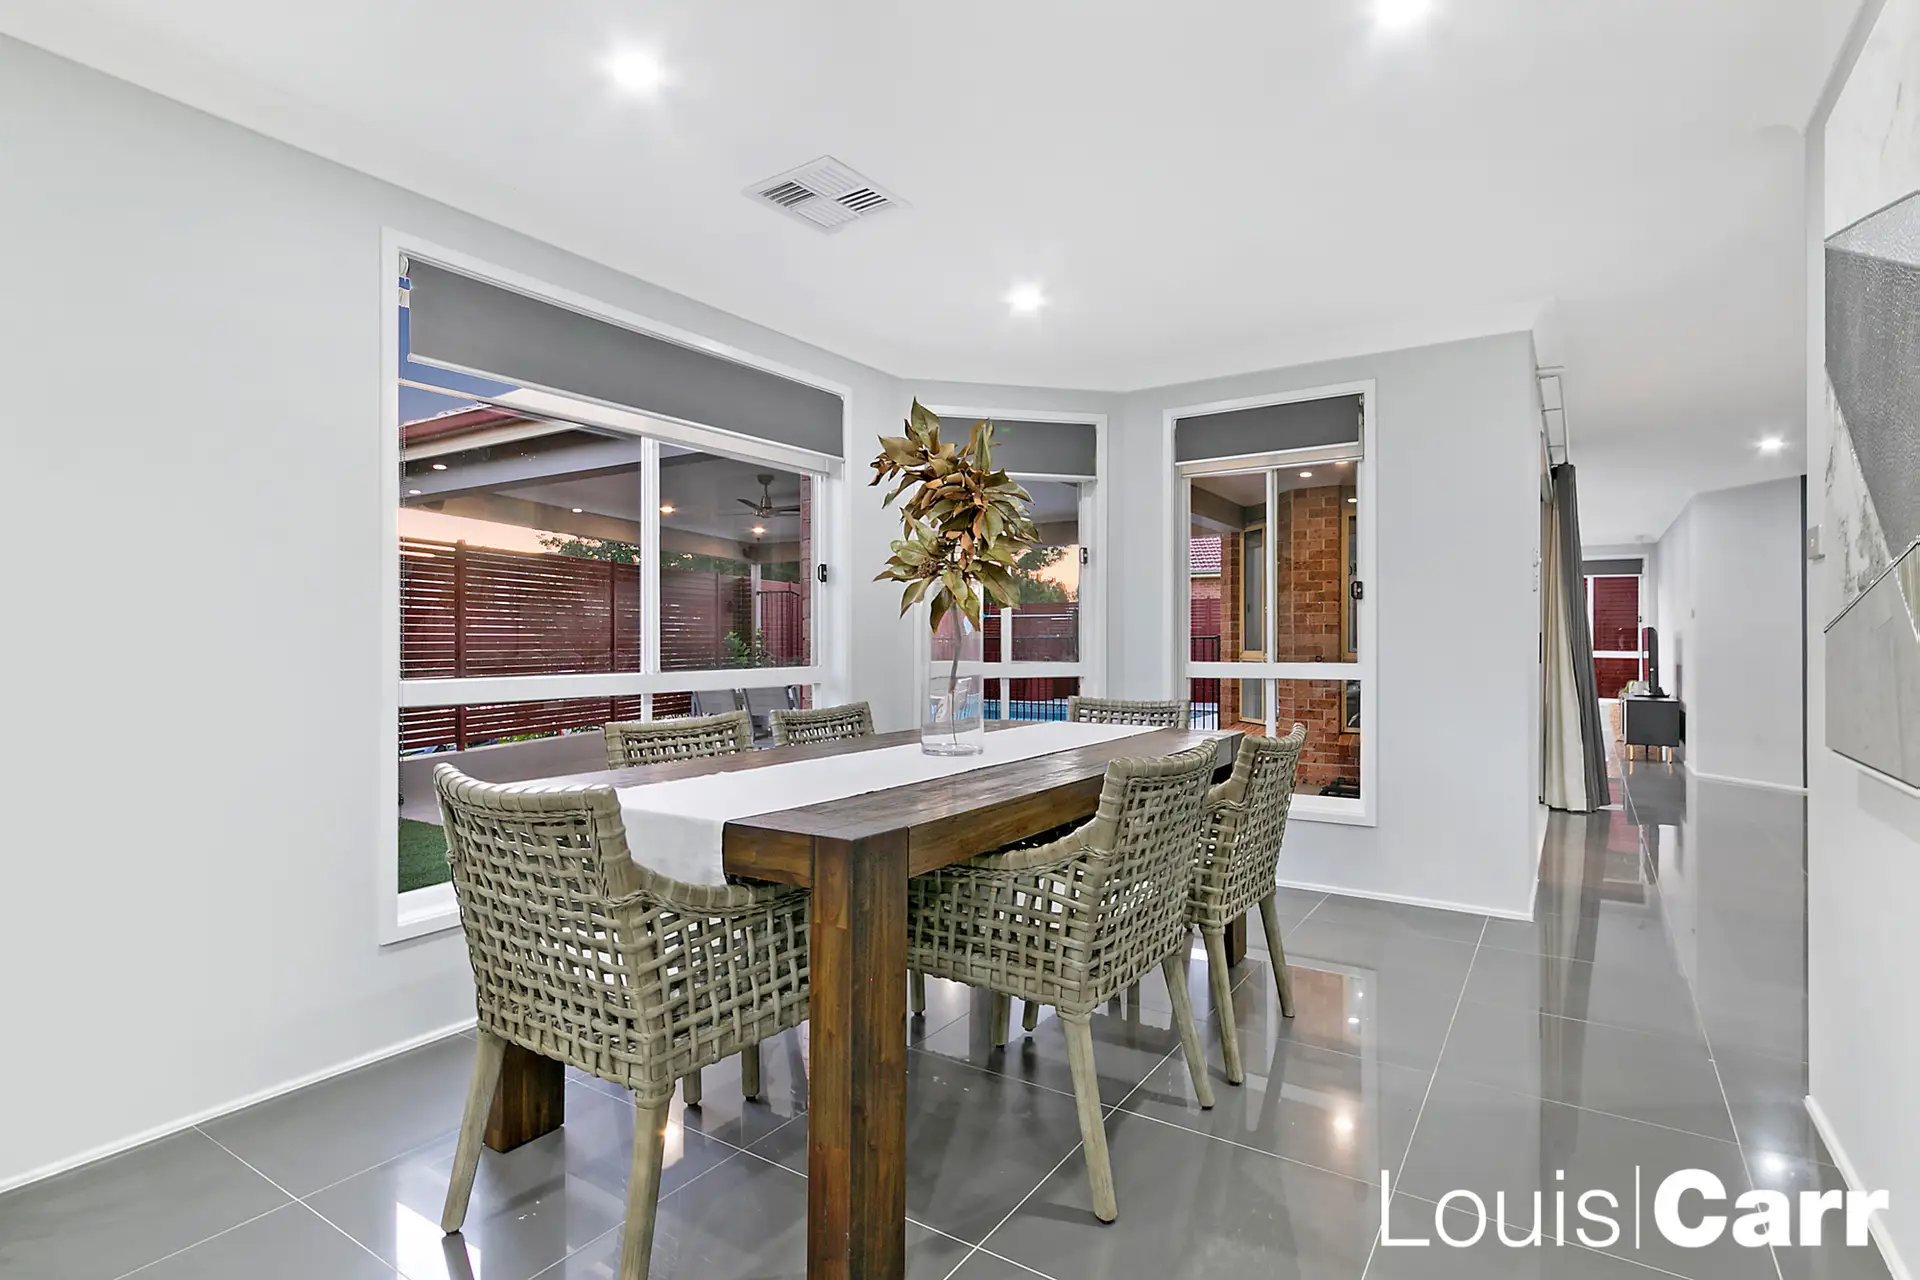 Photo #6: 17 Hotham Avenue, Beaumont Hills - Sold by Louis Carr Real Estate